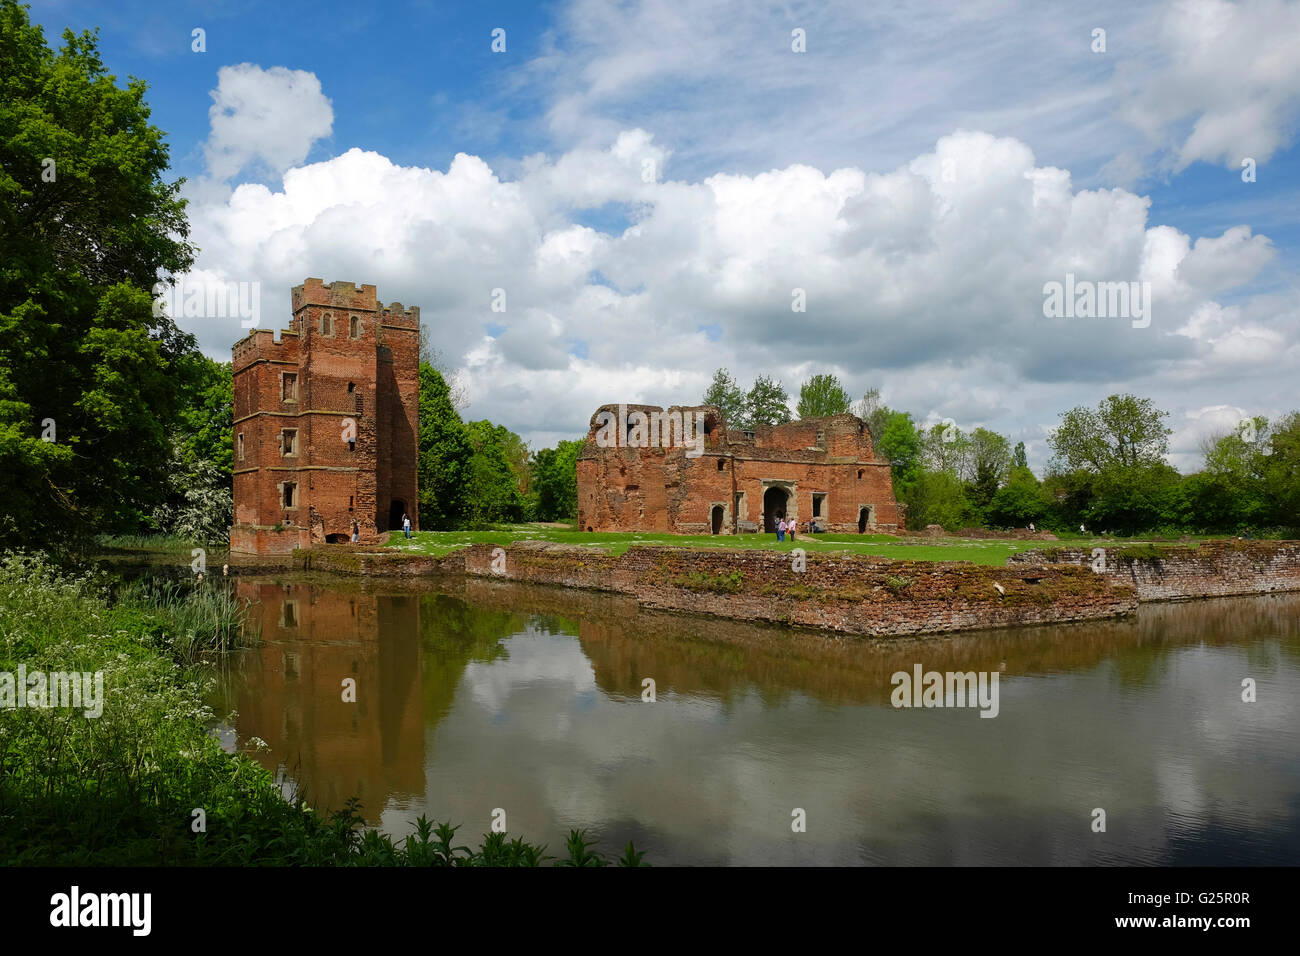 Kirby Muxloe Castle ruins, Leicestershire, England, UK Banque D'Images